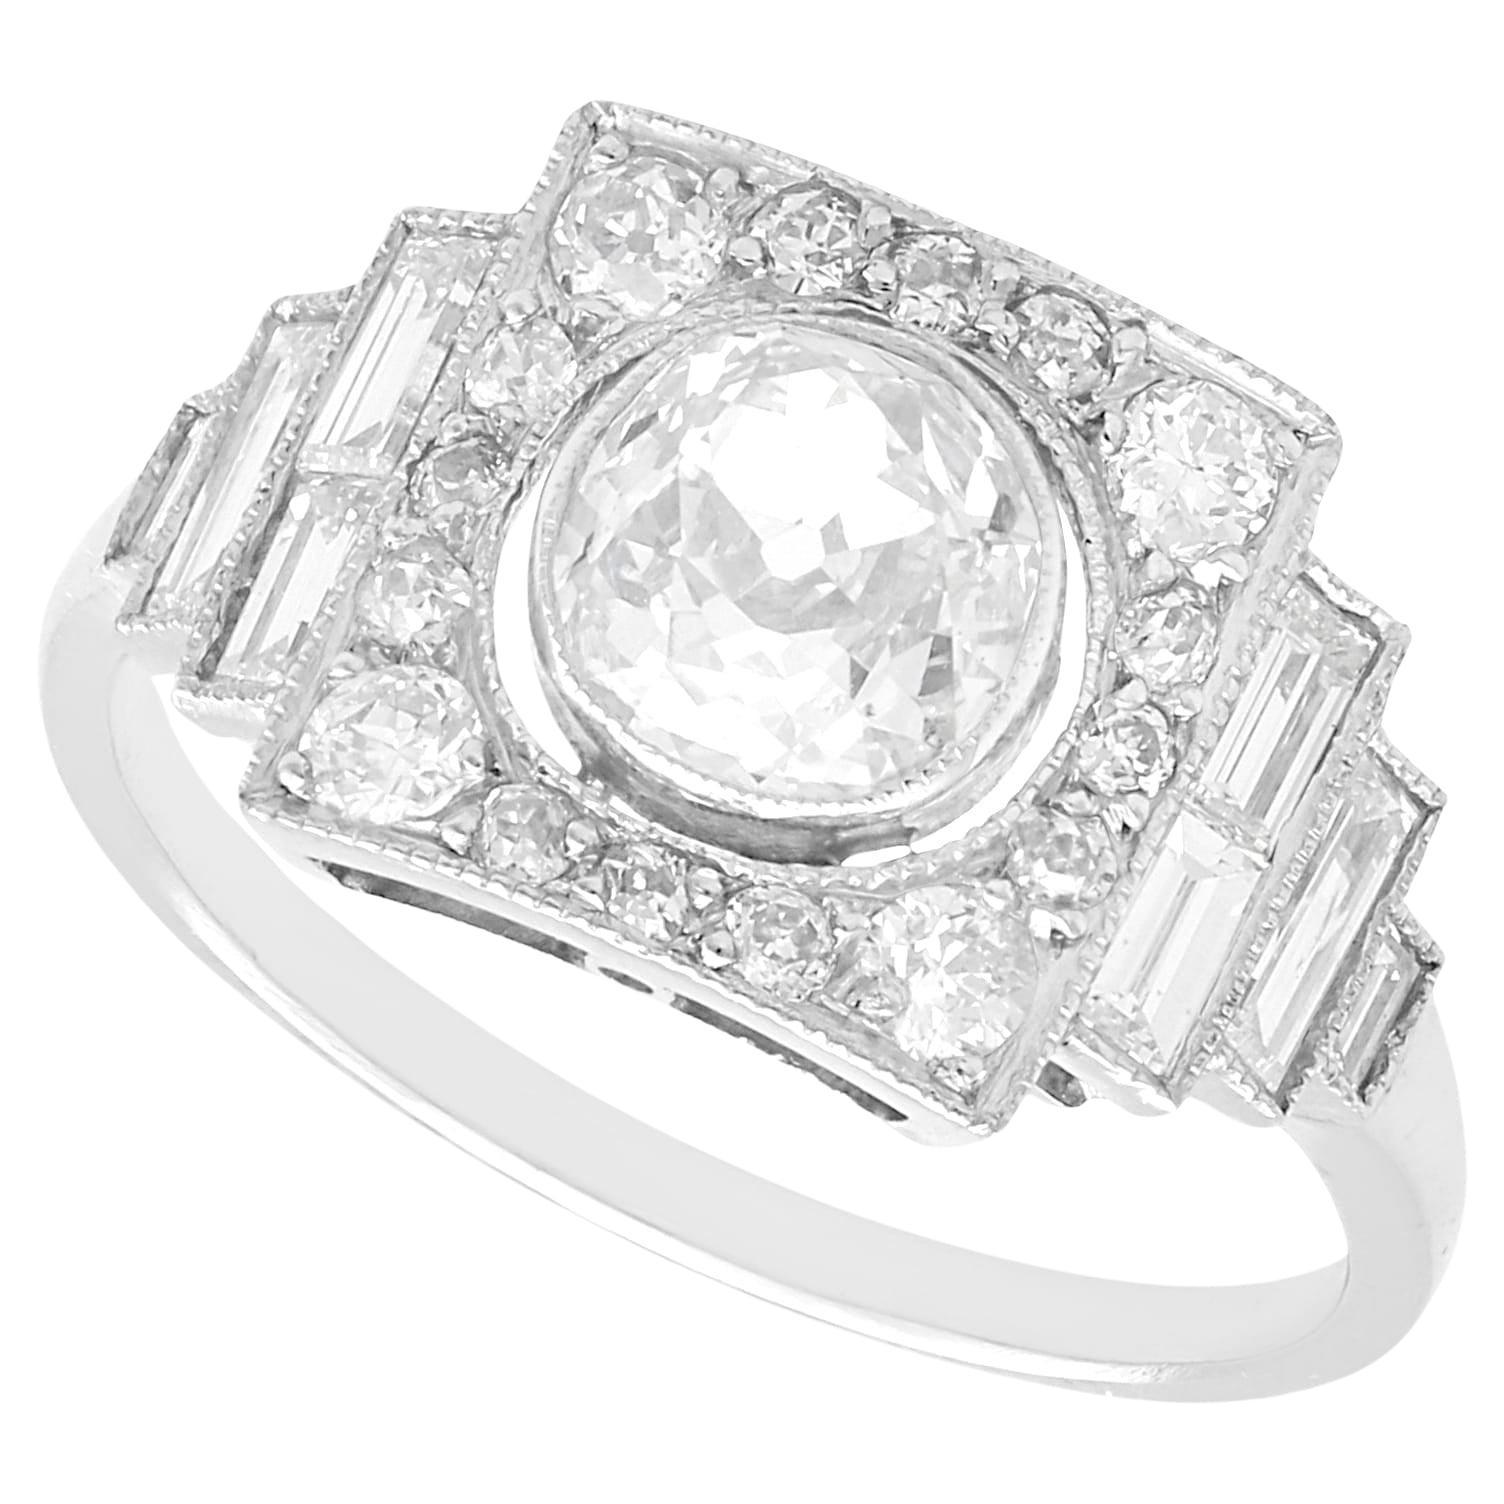 0.87 Carat Diamond and Platinum Ring - Art Deco Style For Sale